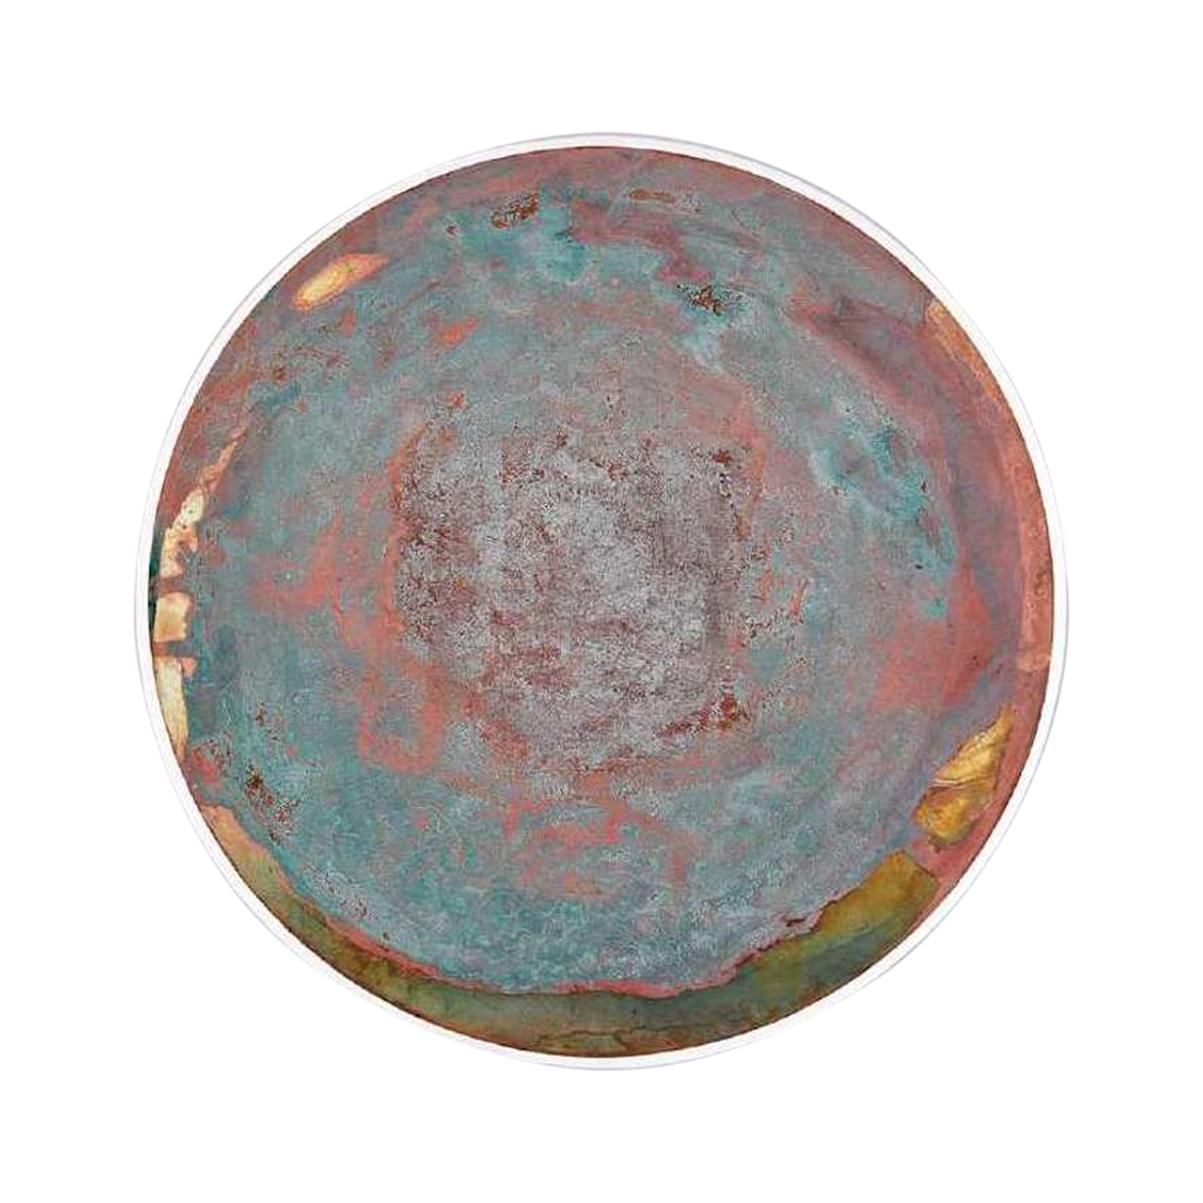 Copper & Stainless Steel Decor/ Plate, 'Star Dust 3.0 #8' by Daishi Luo